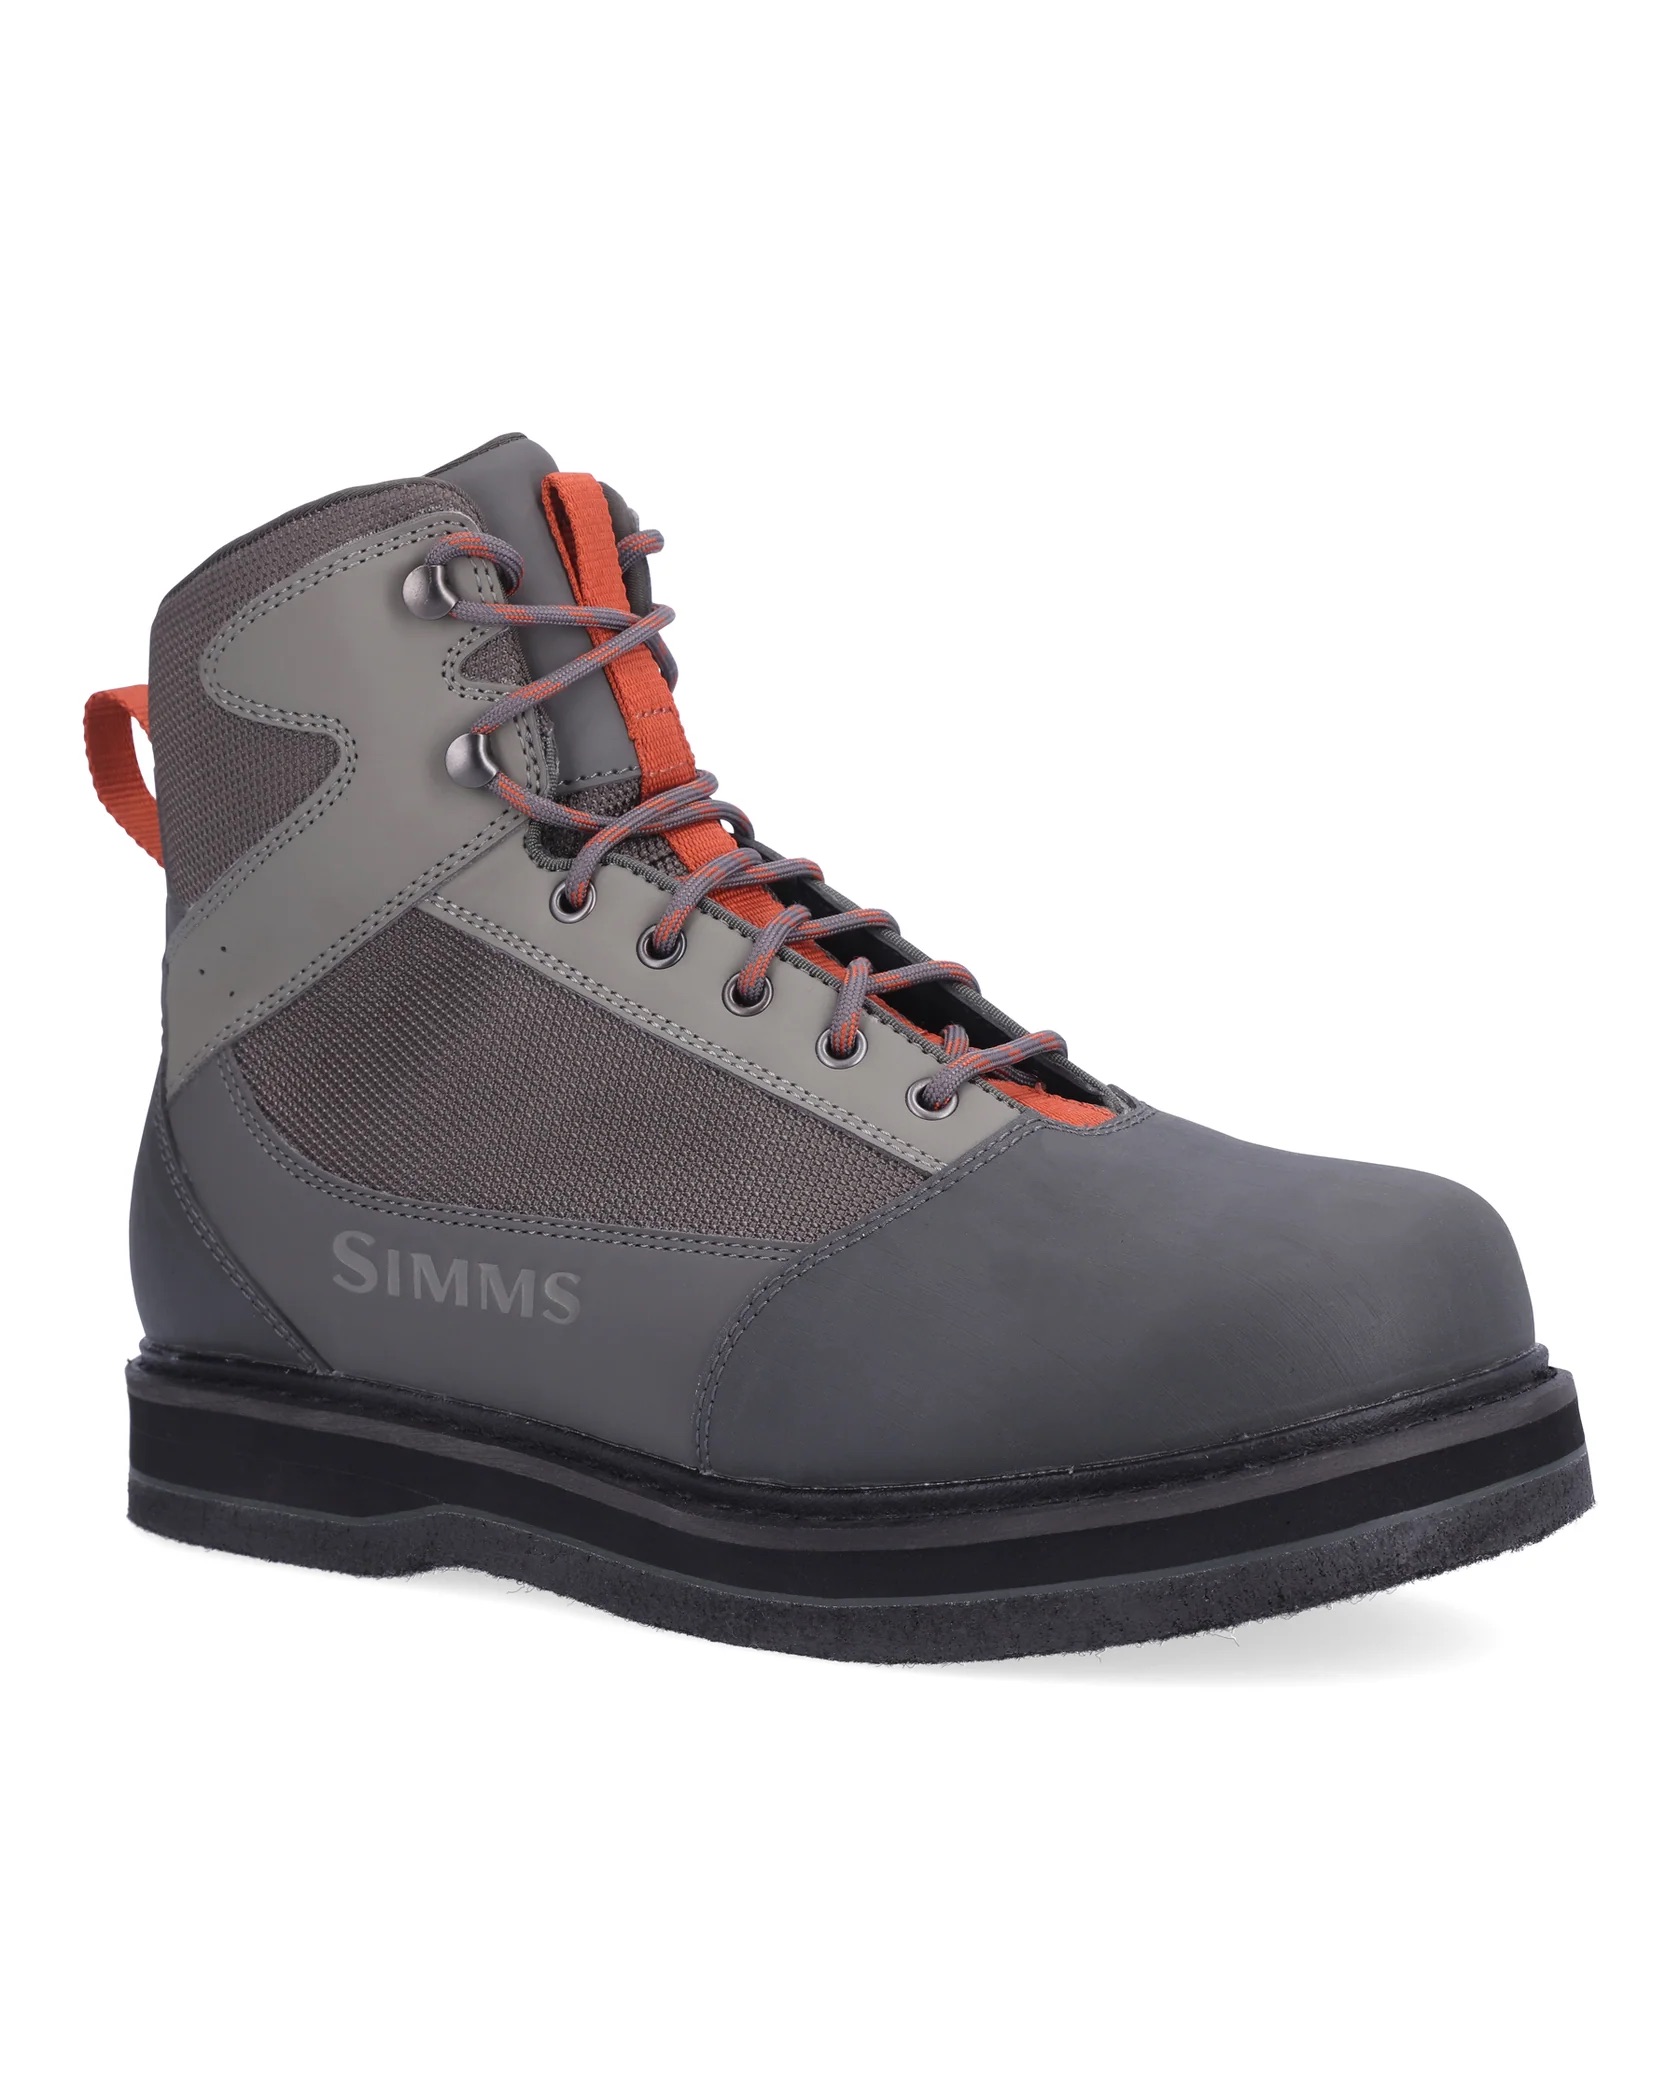 Simms Tributary Wading Boot - Felt - Size 6